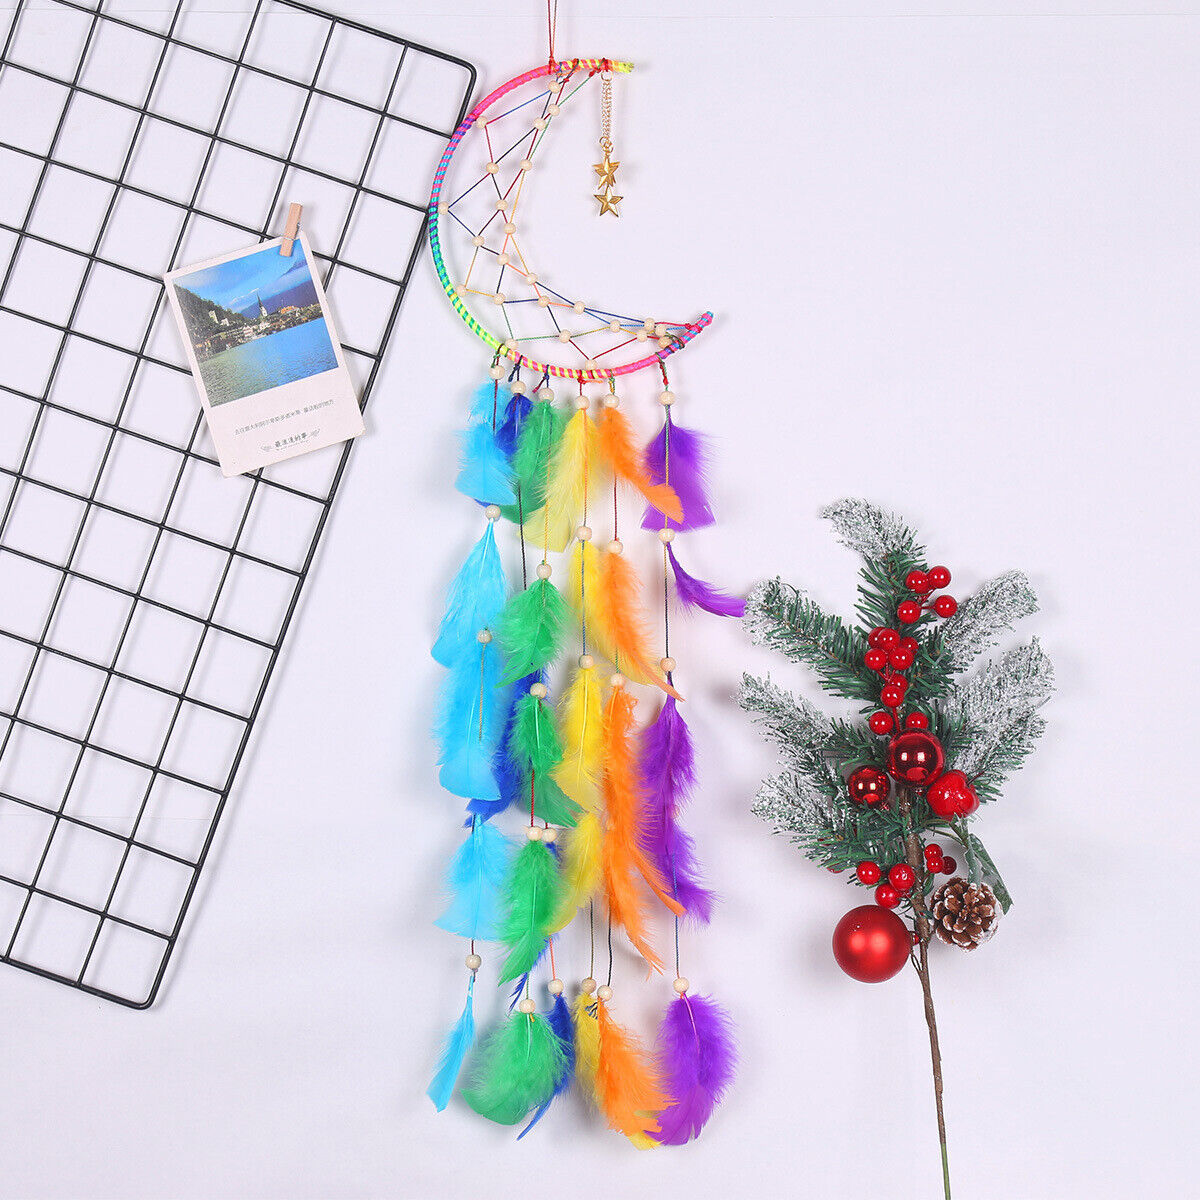 LED Light Dream Catcher Handmade Colorful Feathers Wall Hanging Home Decor Gifts